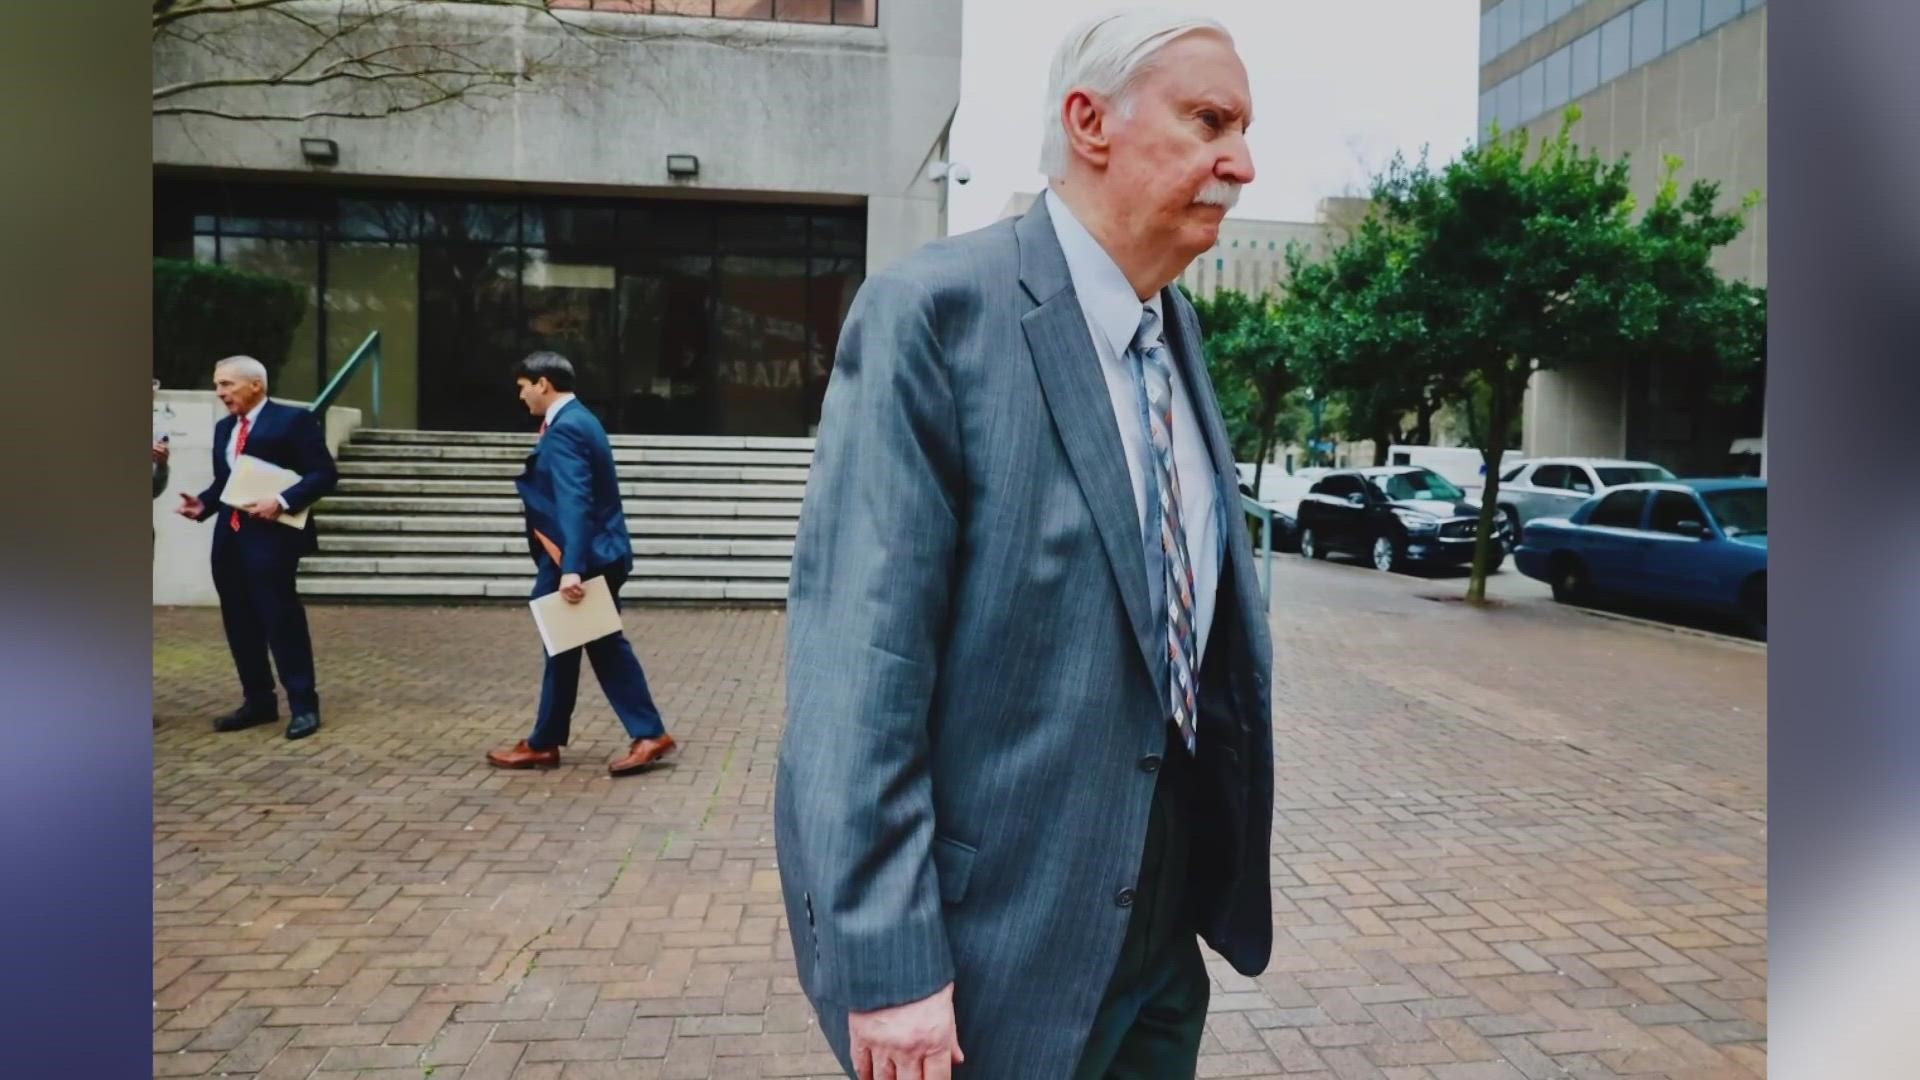 The former head of First NBC appeared shook when he left court after the verdict, facing the real possibility of the rest of his life behind bars.